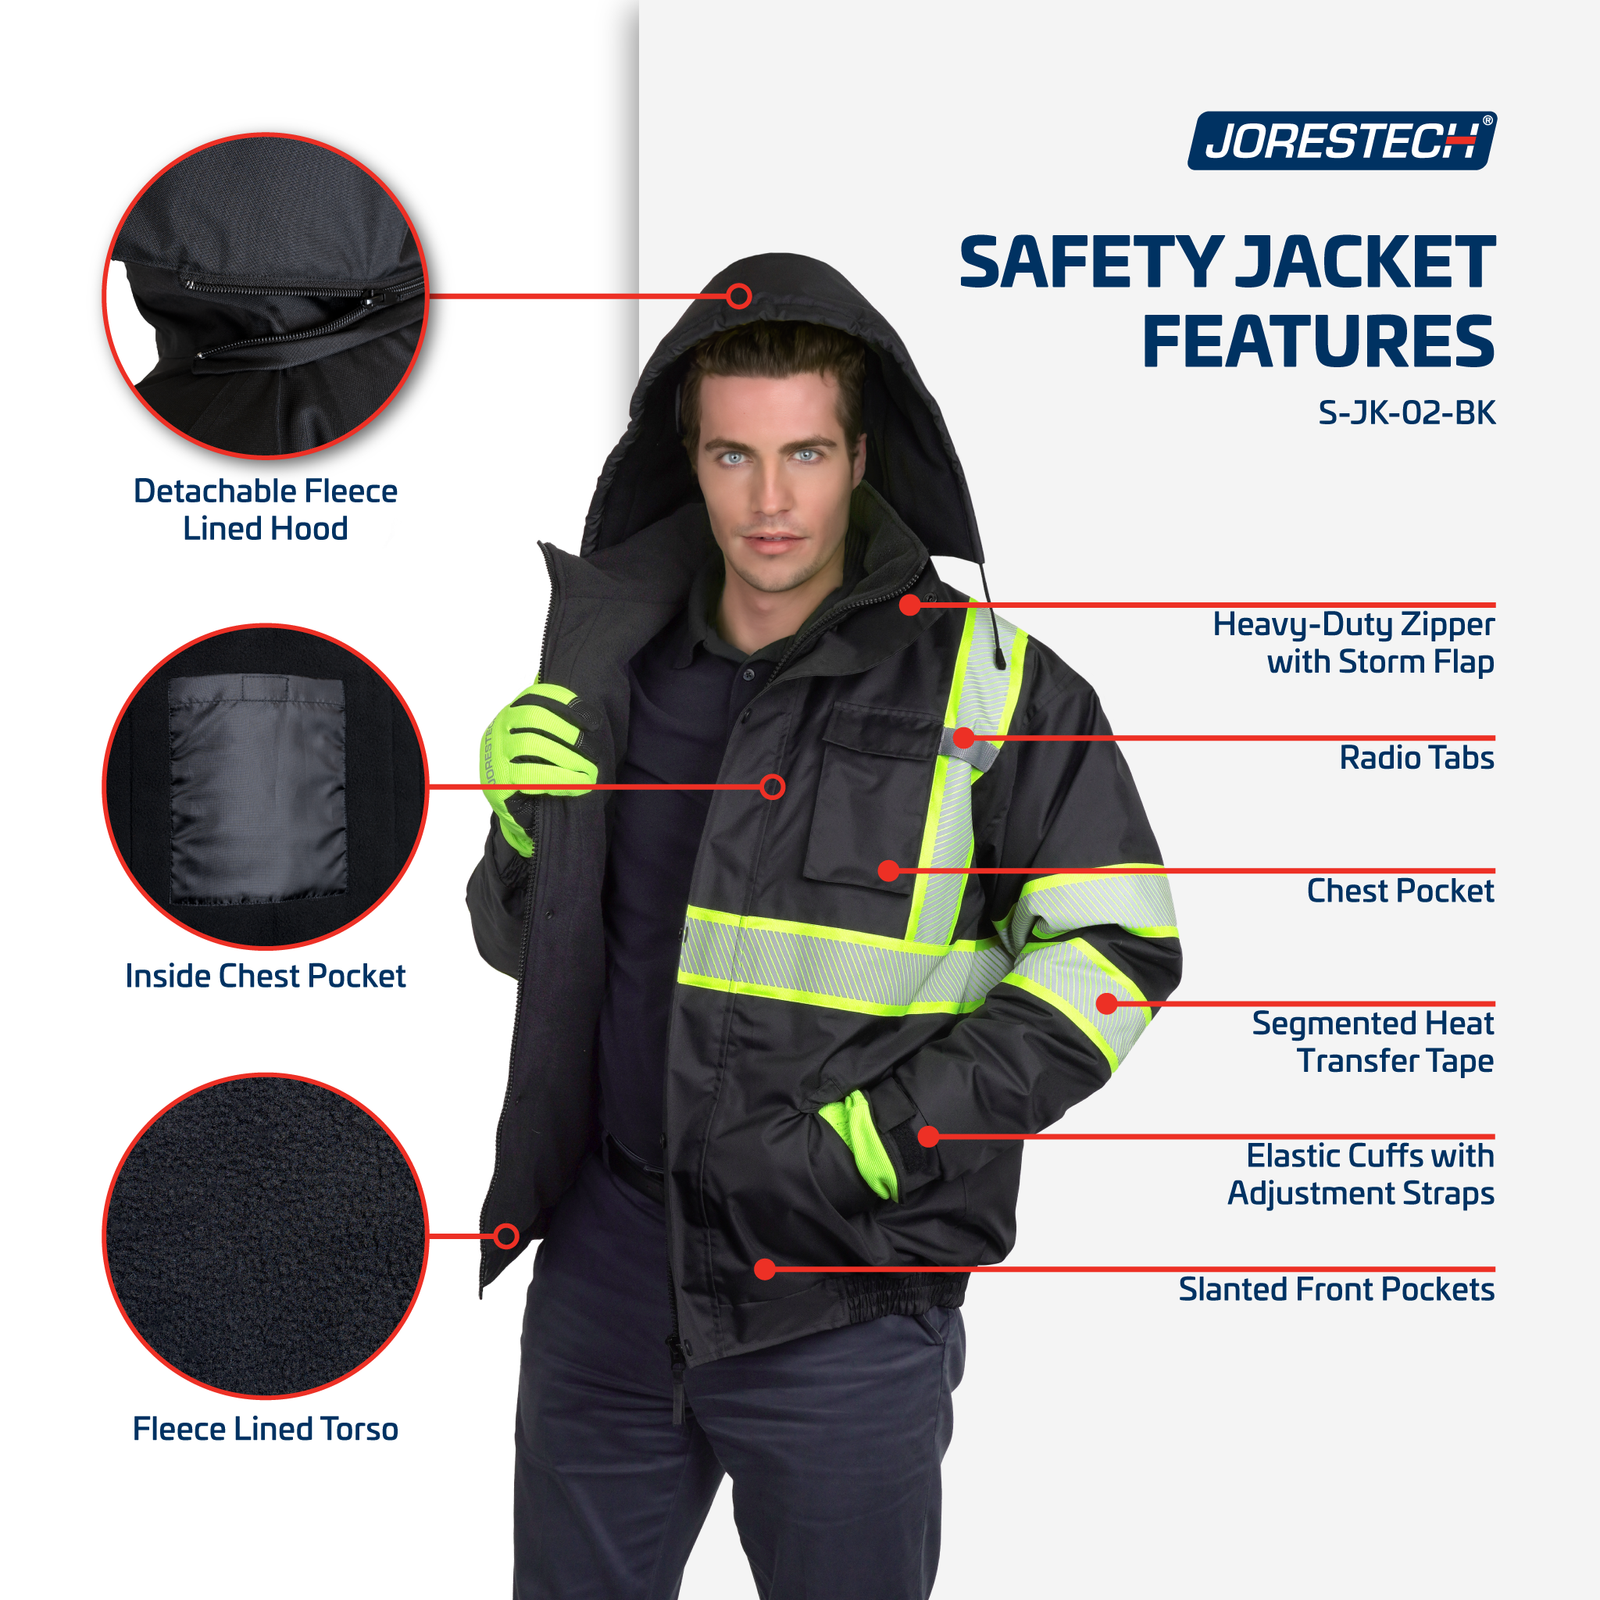 Man wearing the black safety jacket with reflective stripes and call outs listing outstanding features like heavy duty zipper, radio tabs, segmented heat transfer, multiple pockets and more.